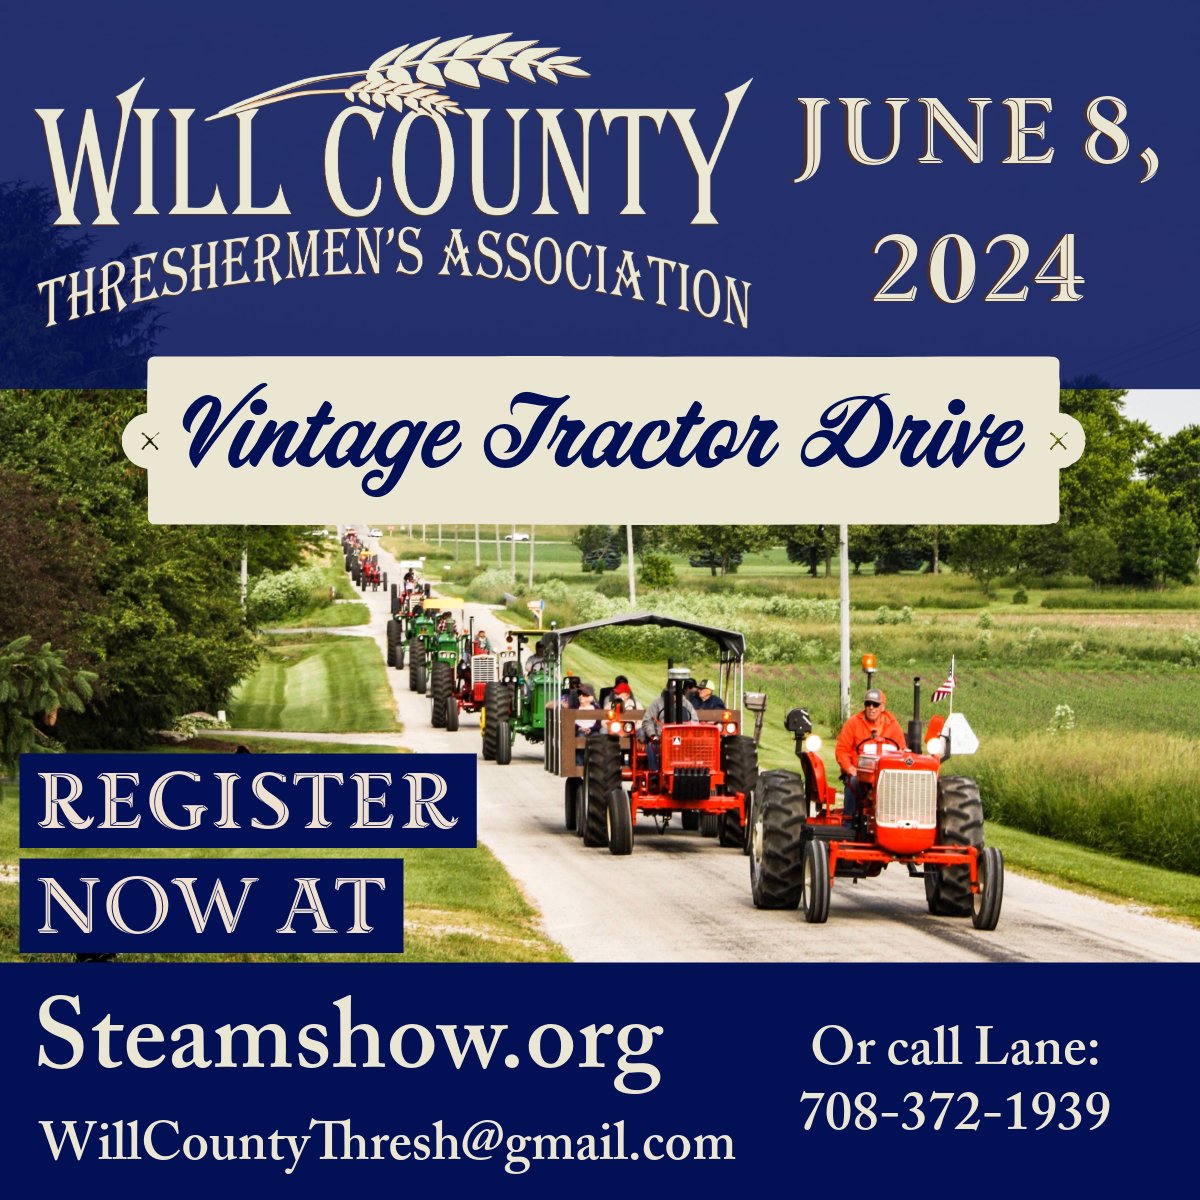 Dust off your vintage tractors and mark your calendars for the WCTA Vintage Tractor Drive on June 8th, 2024! Join us for a scenic 35-mile ride through Will County, supporting our mission of preserving agricultural history. Registration is open online